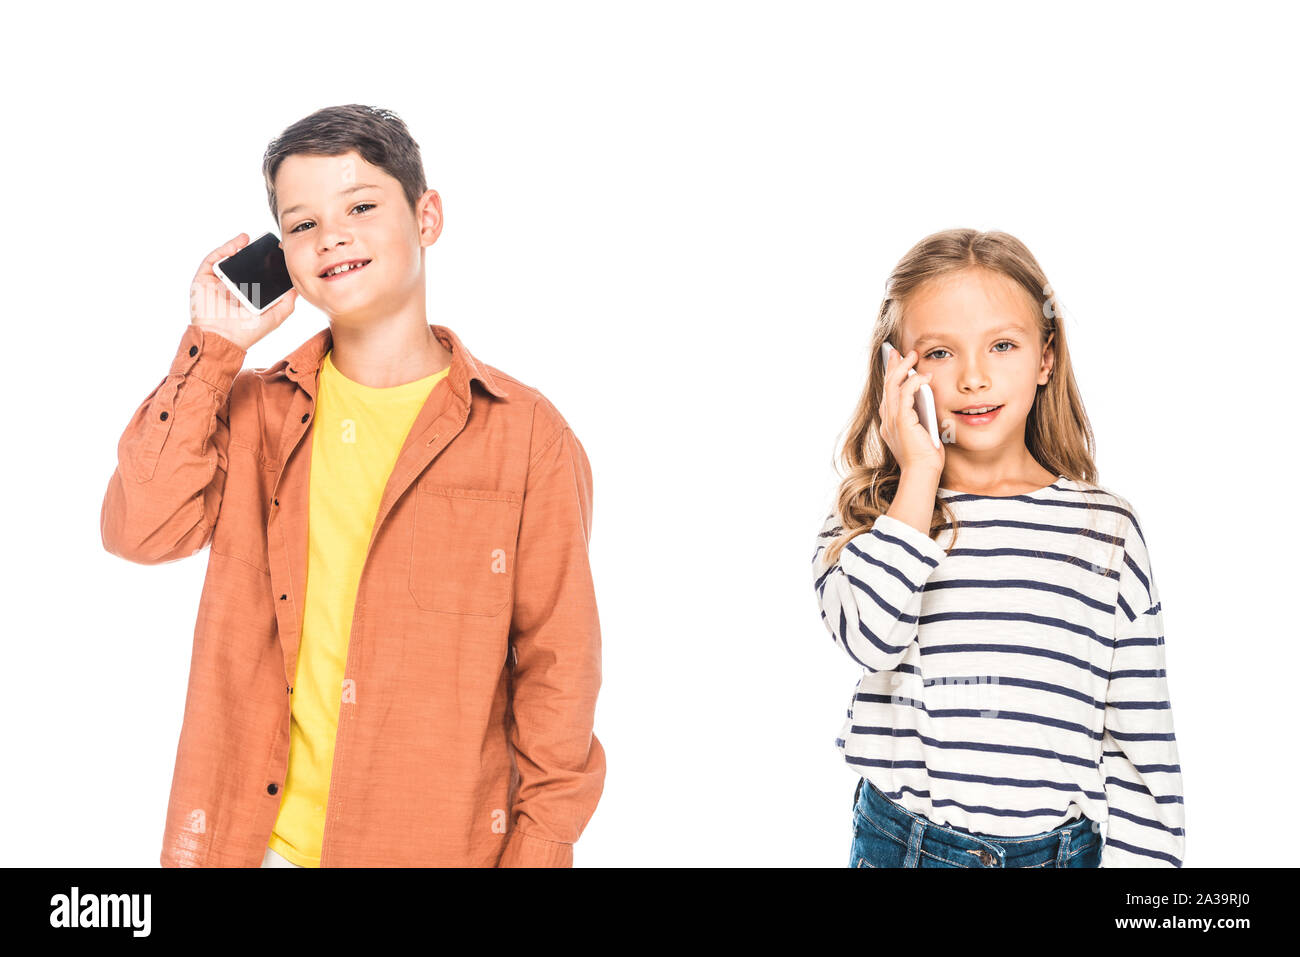 two smiling kids talking on smartphones isolated on white Stock Photo